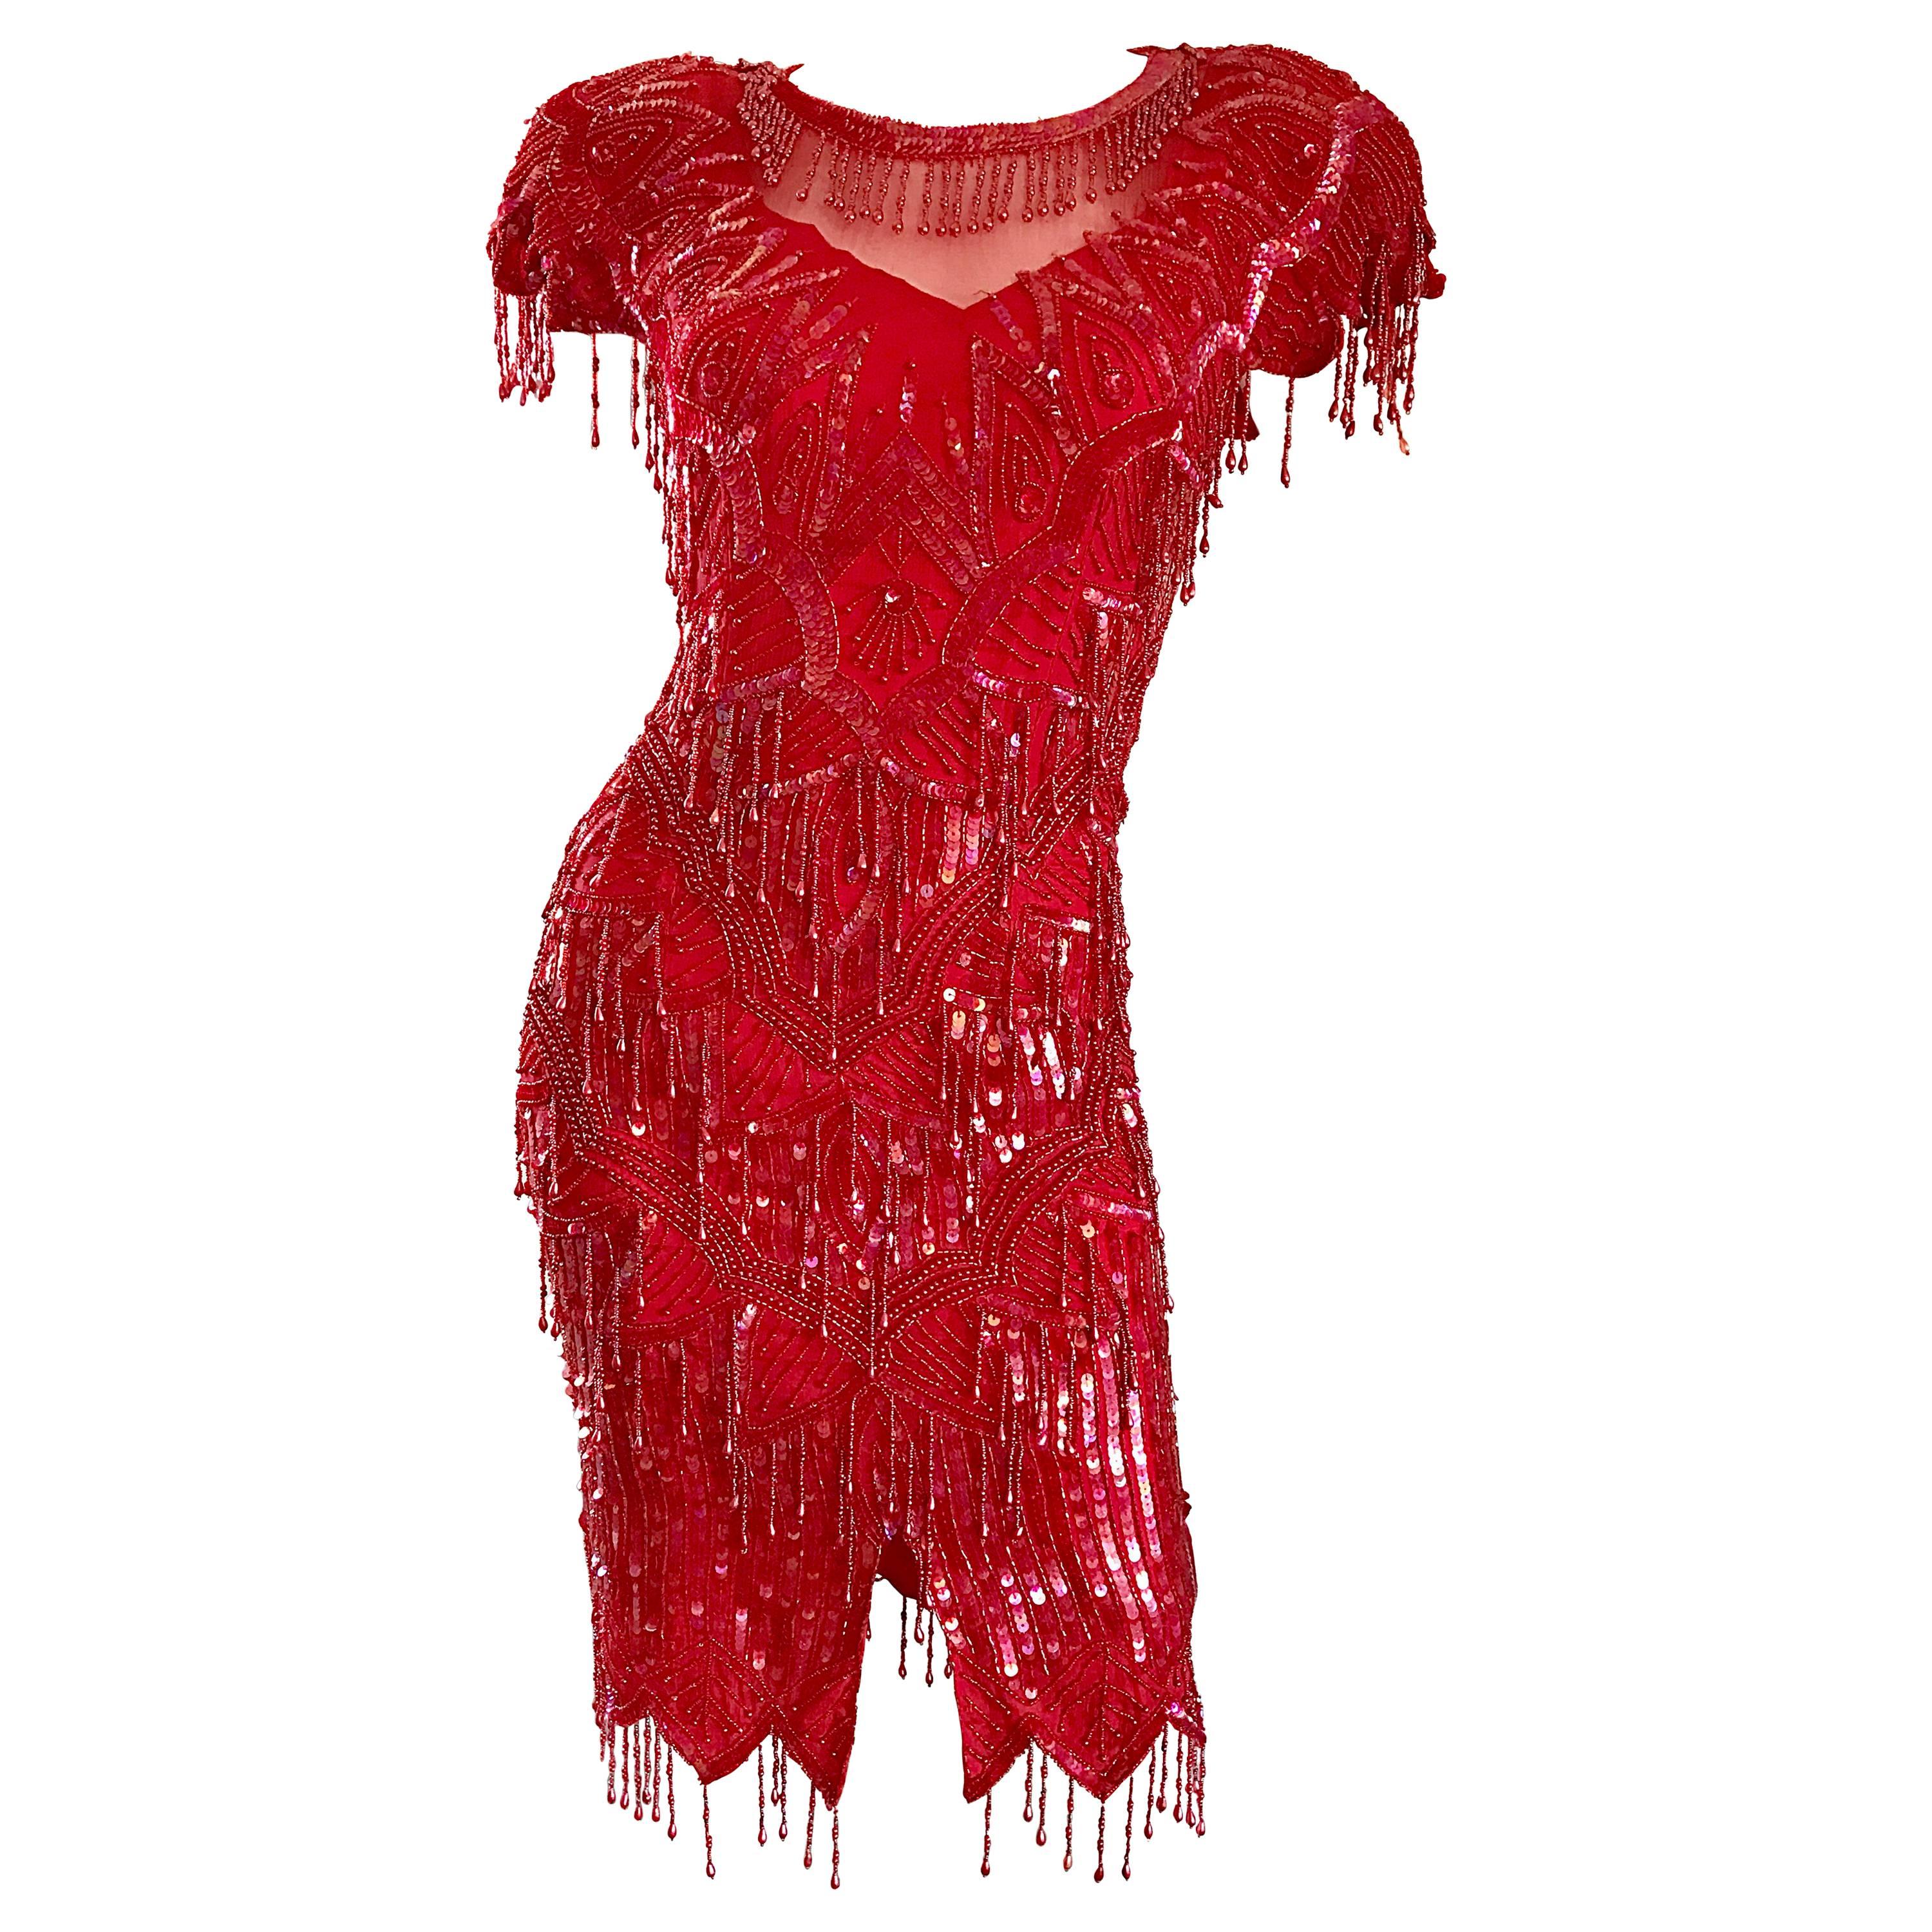 Incredible Lipstick Red Silk Sequin Beaded Flapper Style Vintage Cocktail Dress